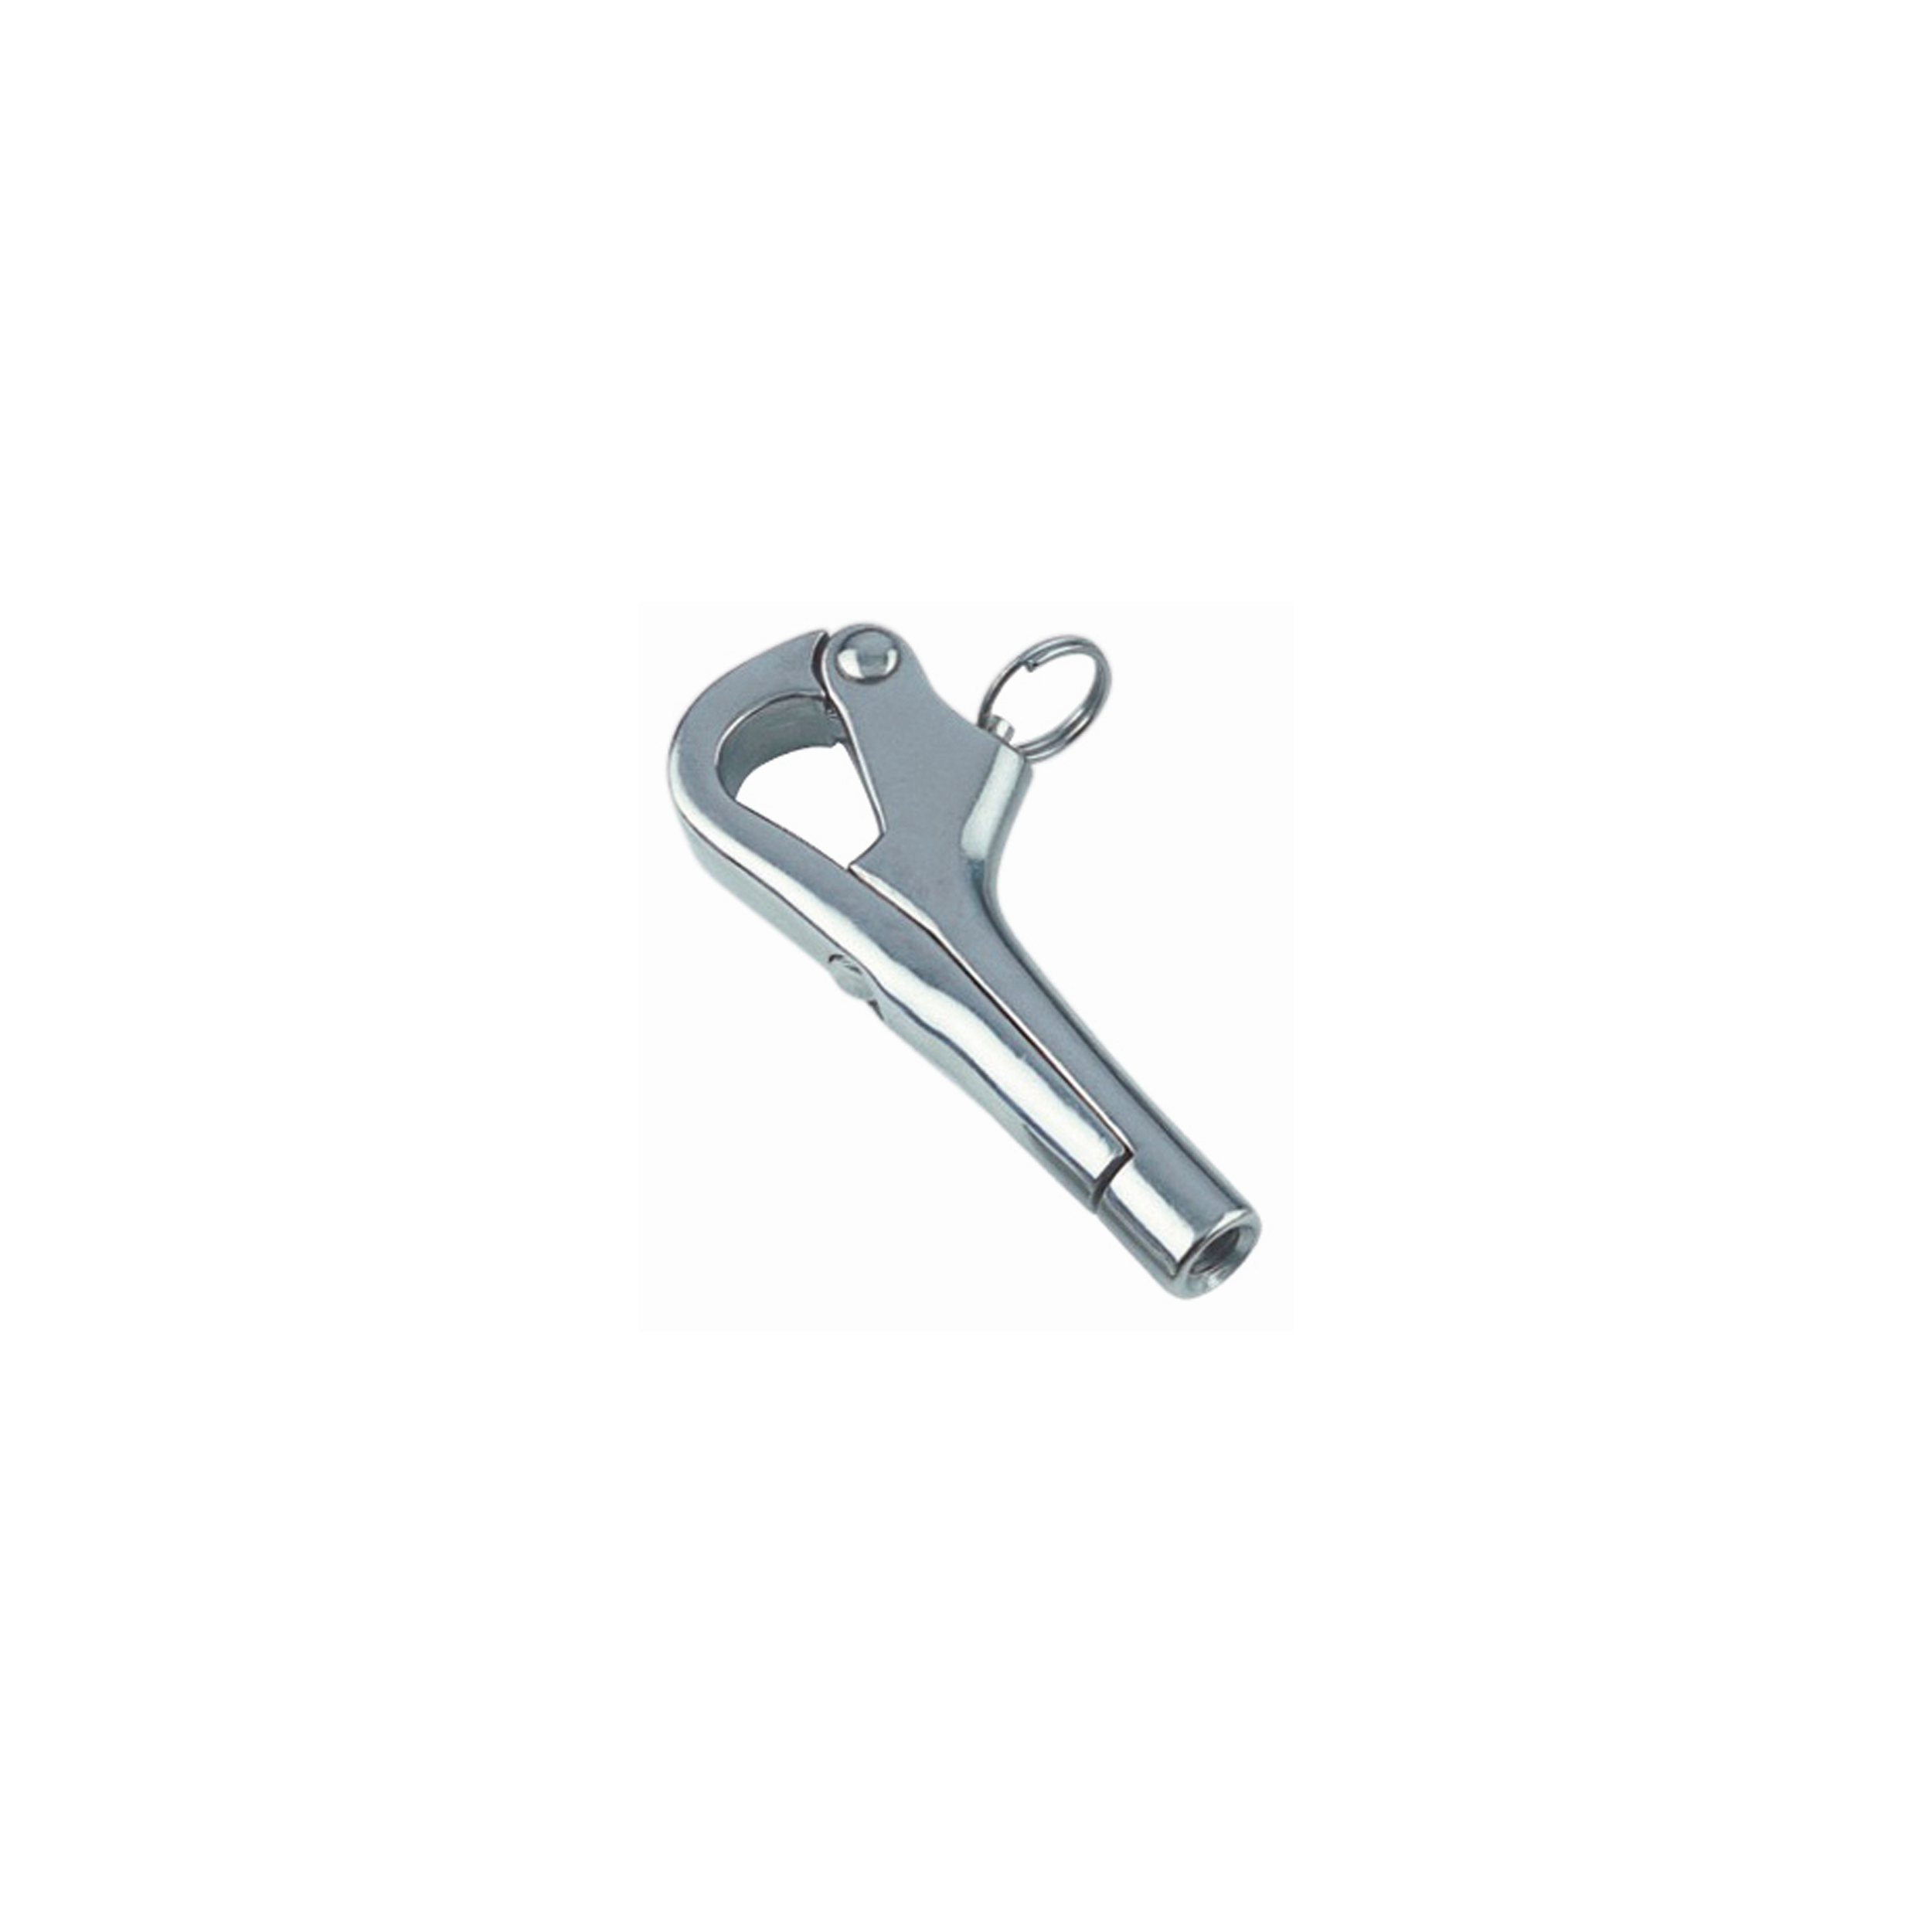 Pelican hook with internal thread A4  M10, lenght 125mm